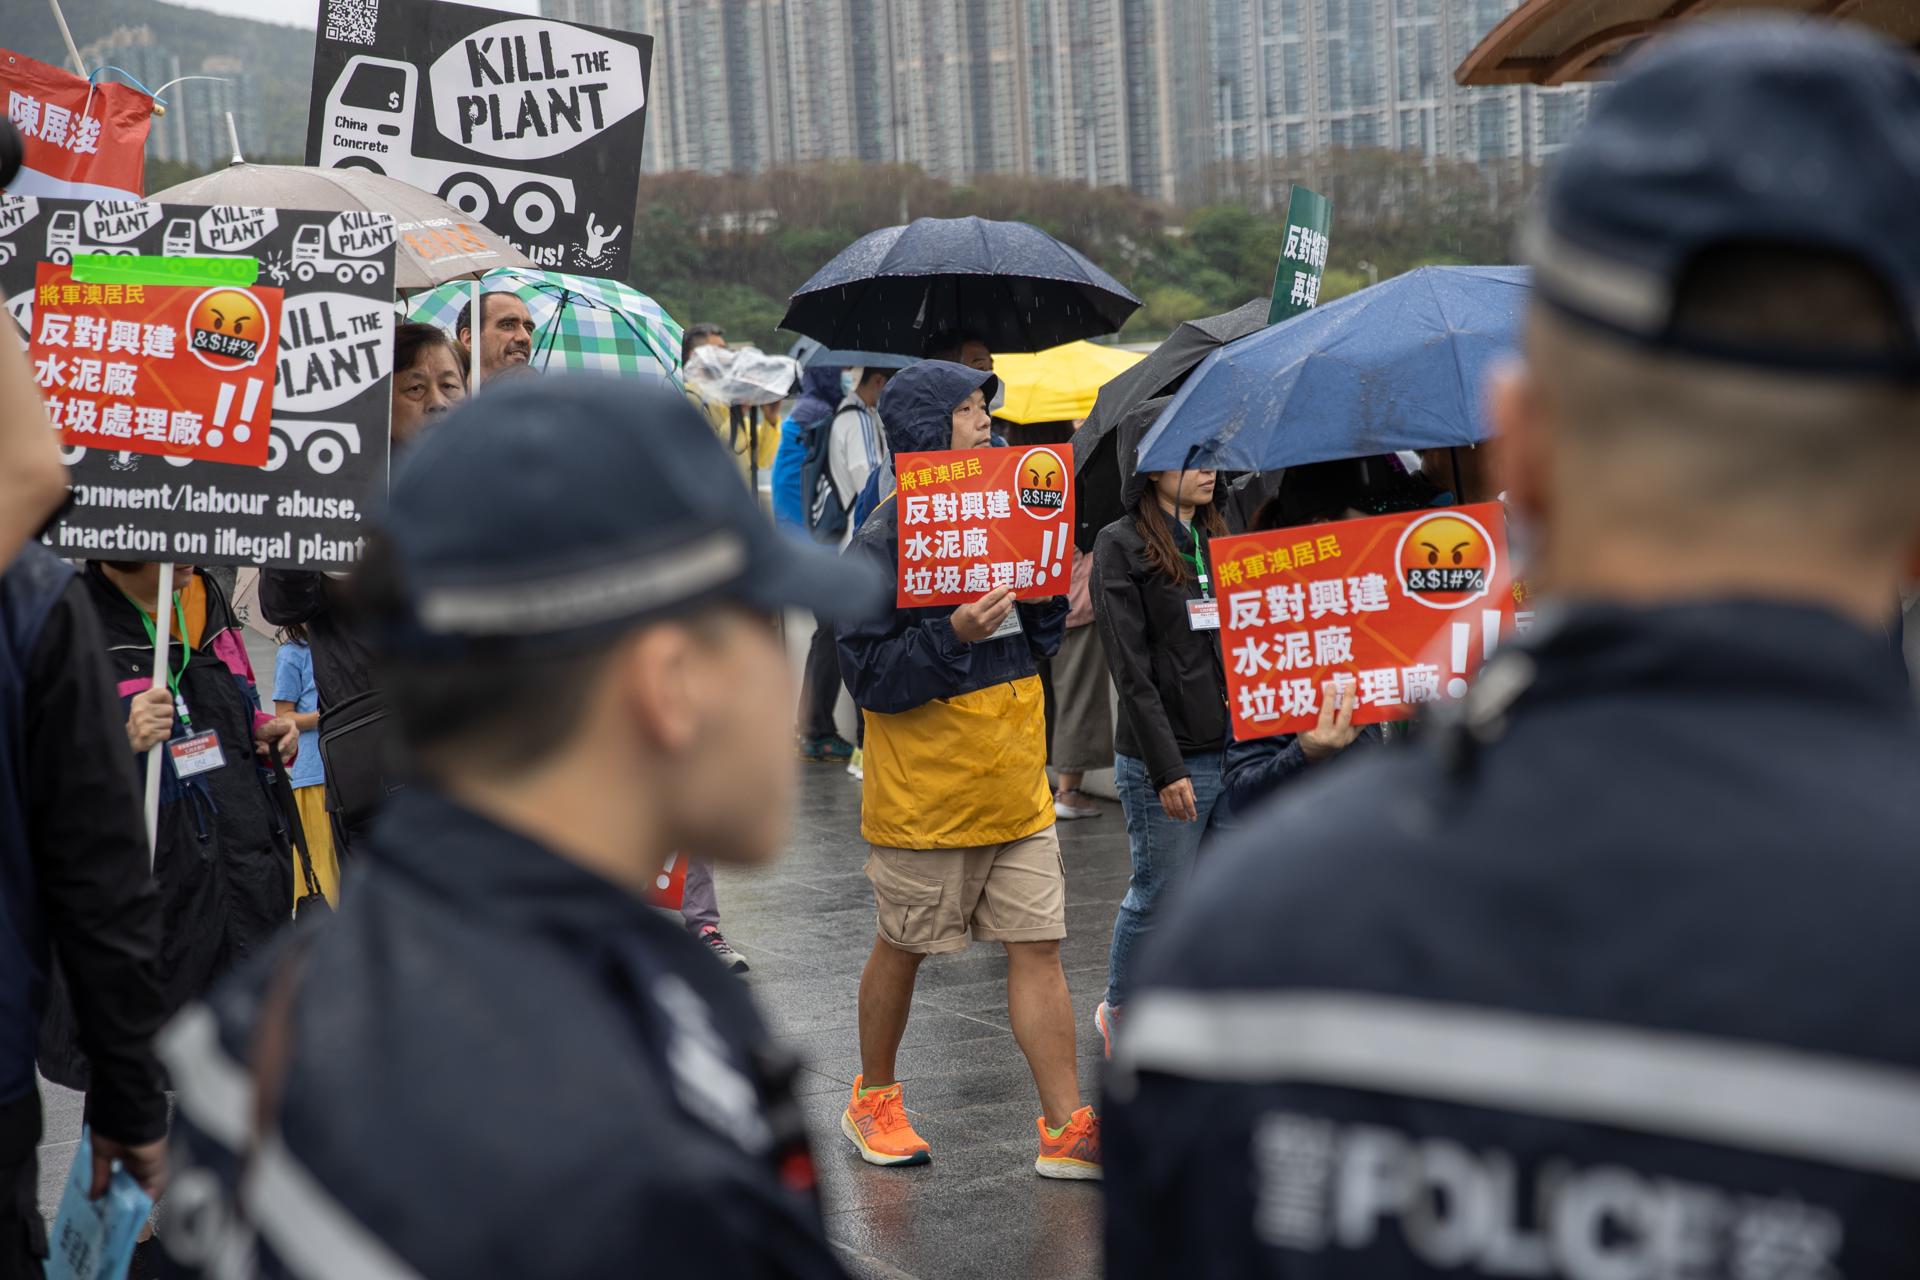 Homeowners wearing number tags around their neck attend a rally against a reclamation plan in Hong Kong, China, 26 March 2023. EFE/EPA/JEROME FAVRE